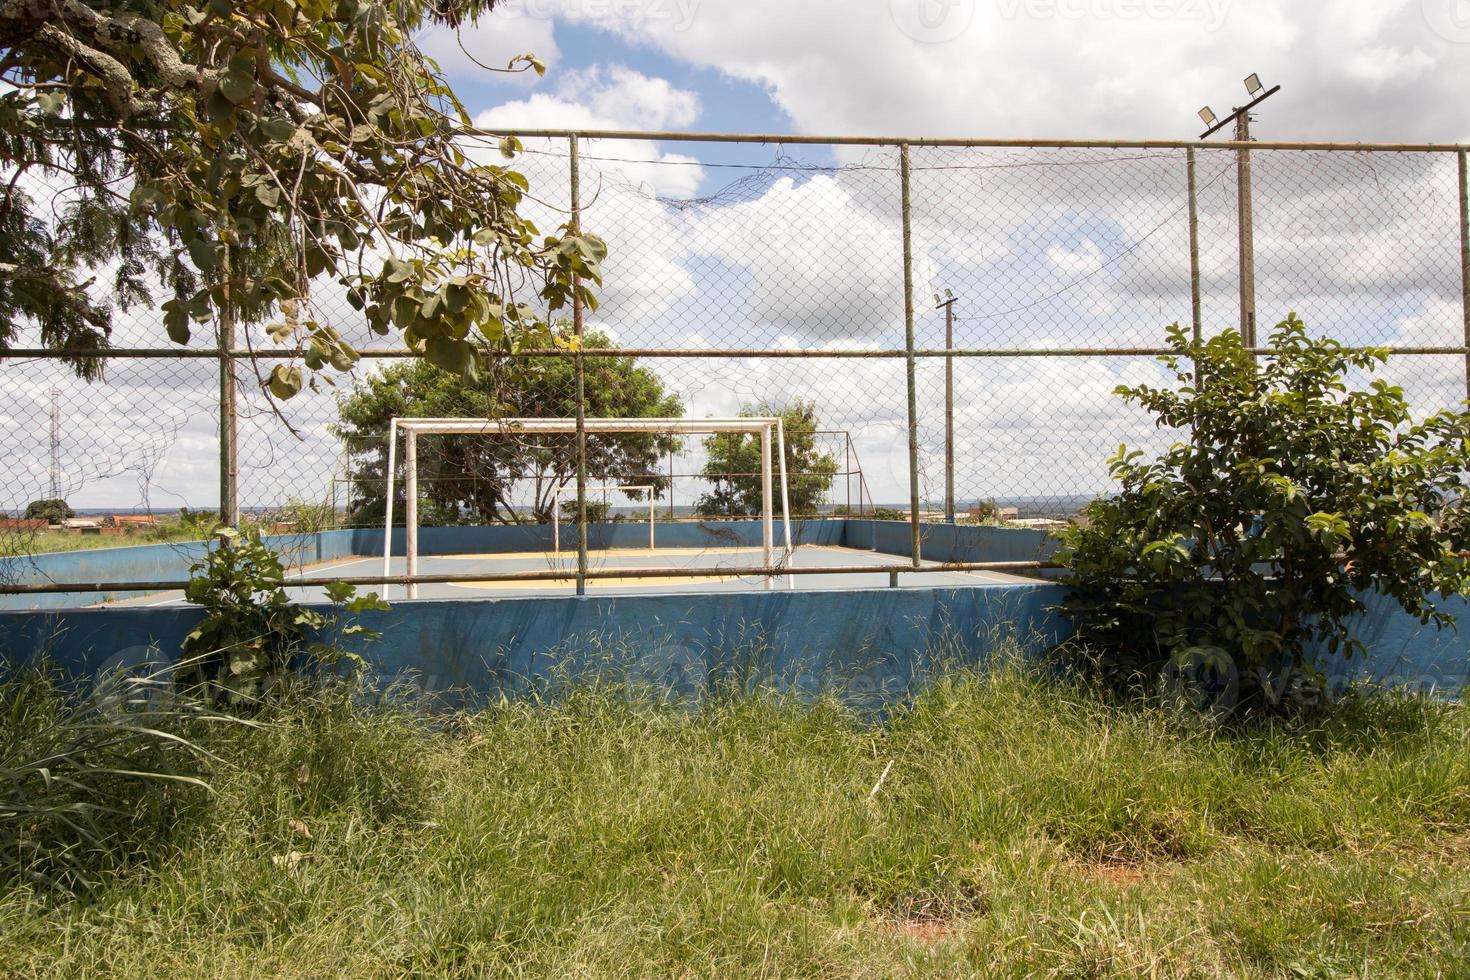 A typical soccer field that are found throughout the impoverished neighborhoods in Brazil photo